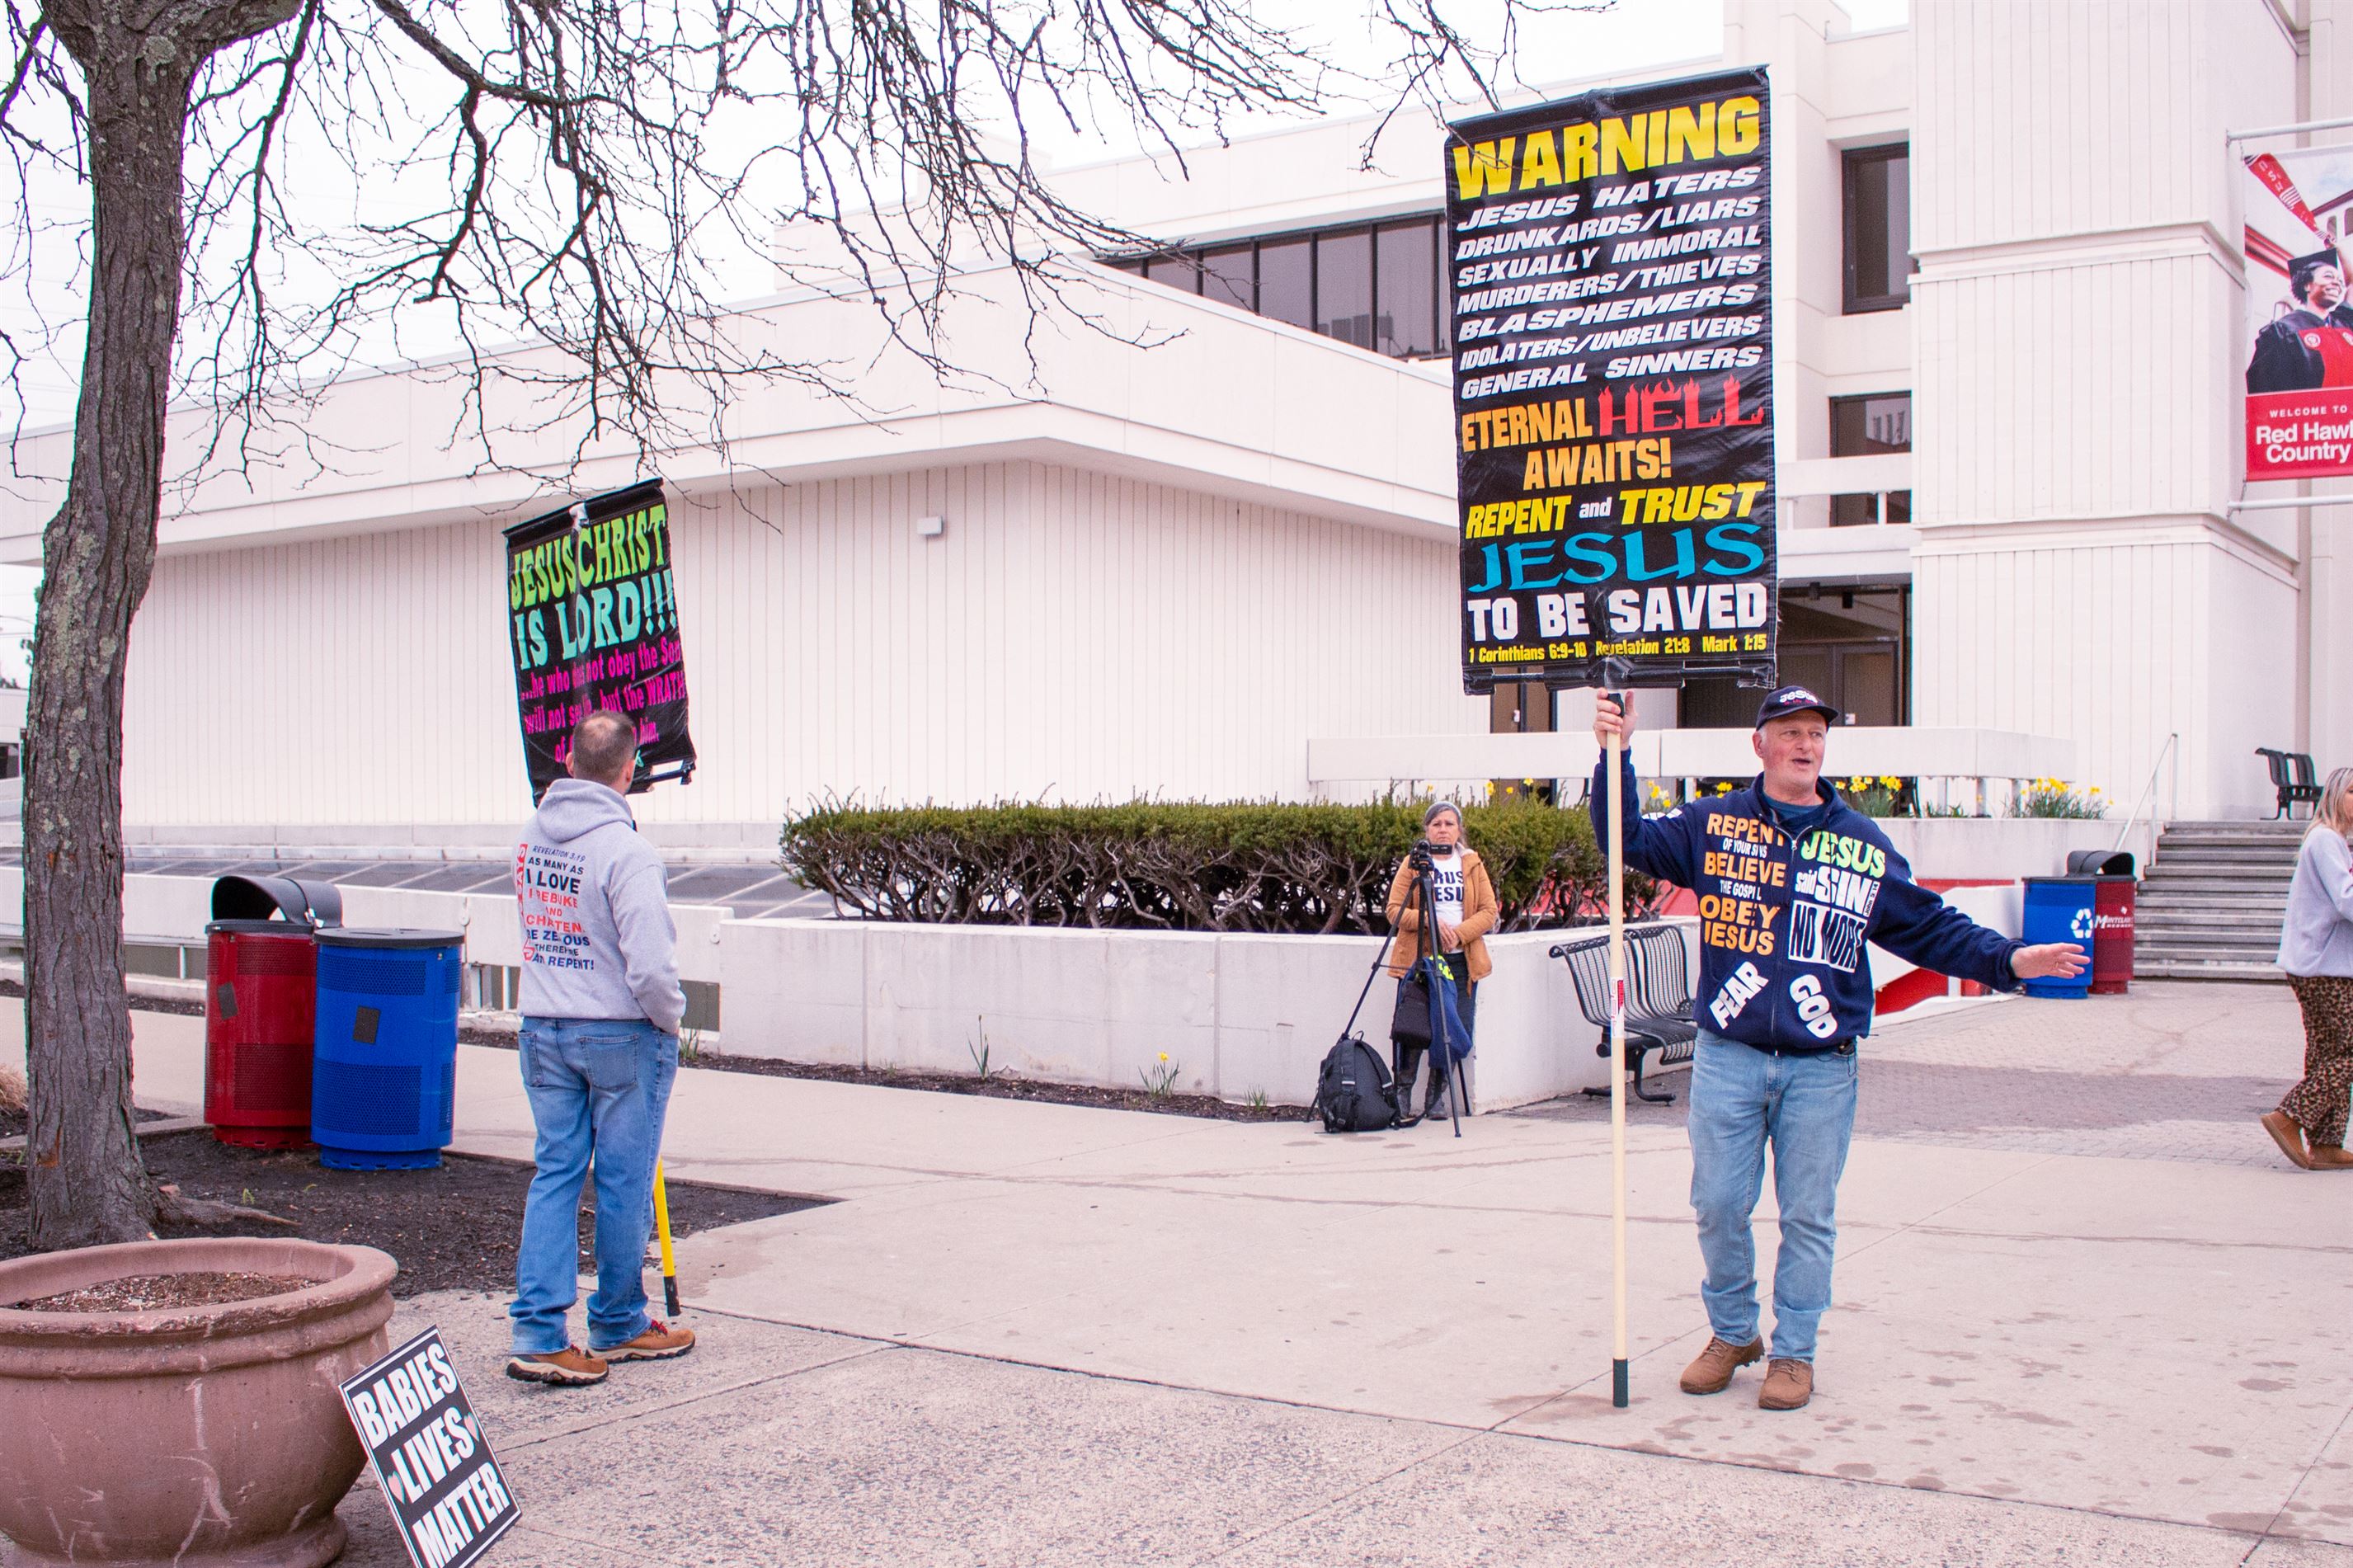 The protestors stand in the Student Center Quad, trying to engage students.
Sal DiMaggio | The Montclarion